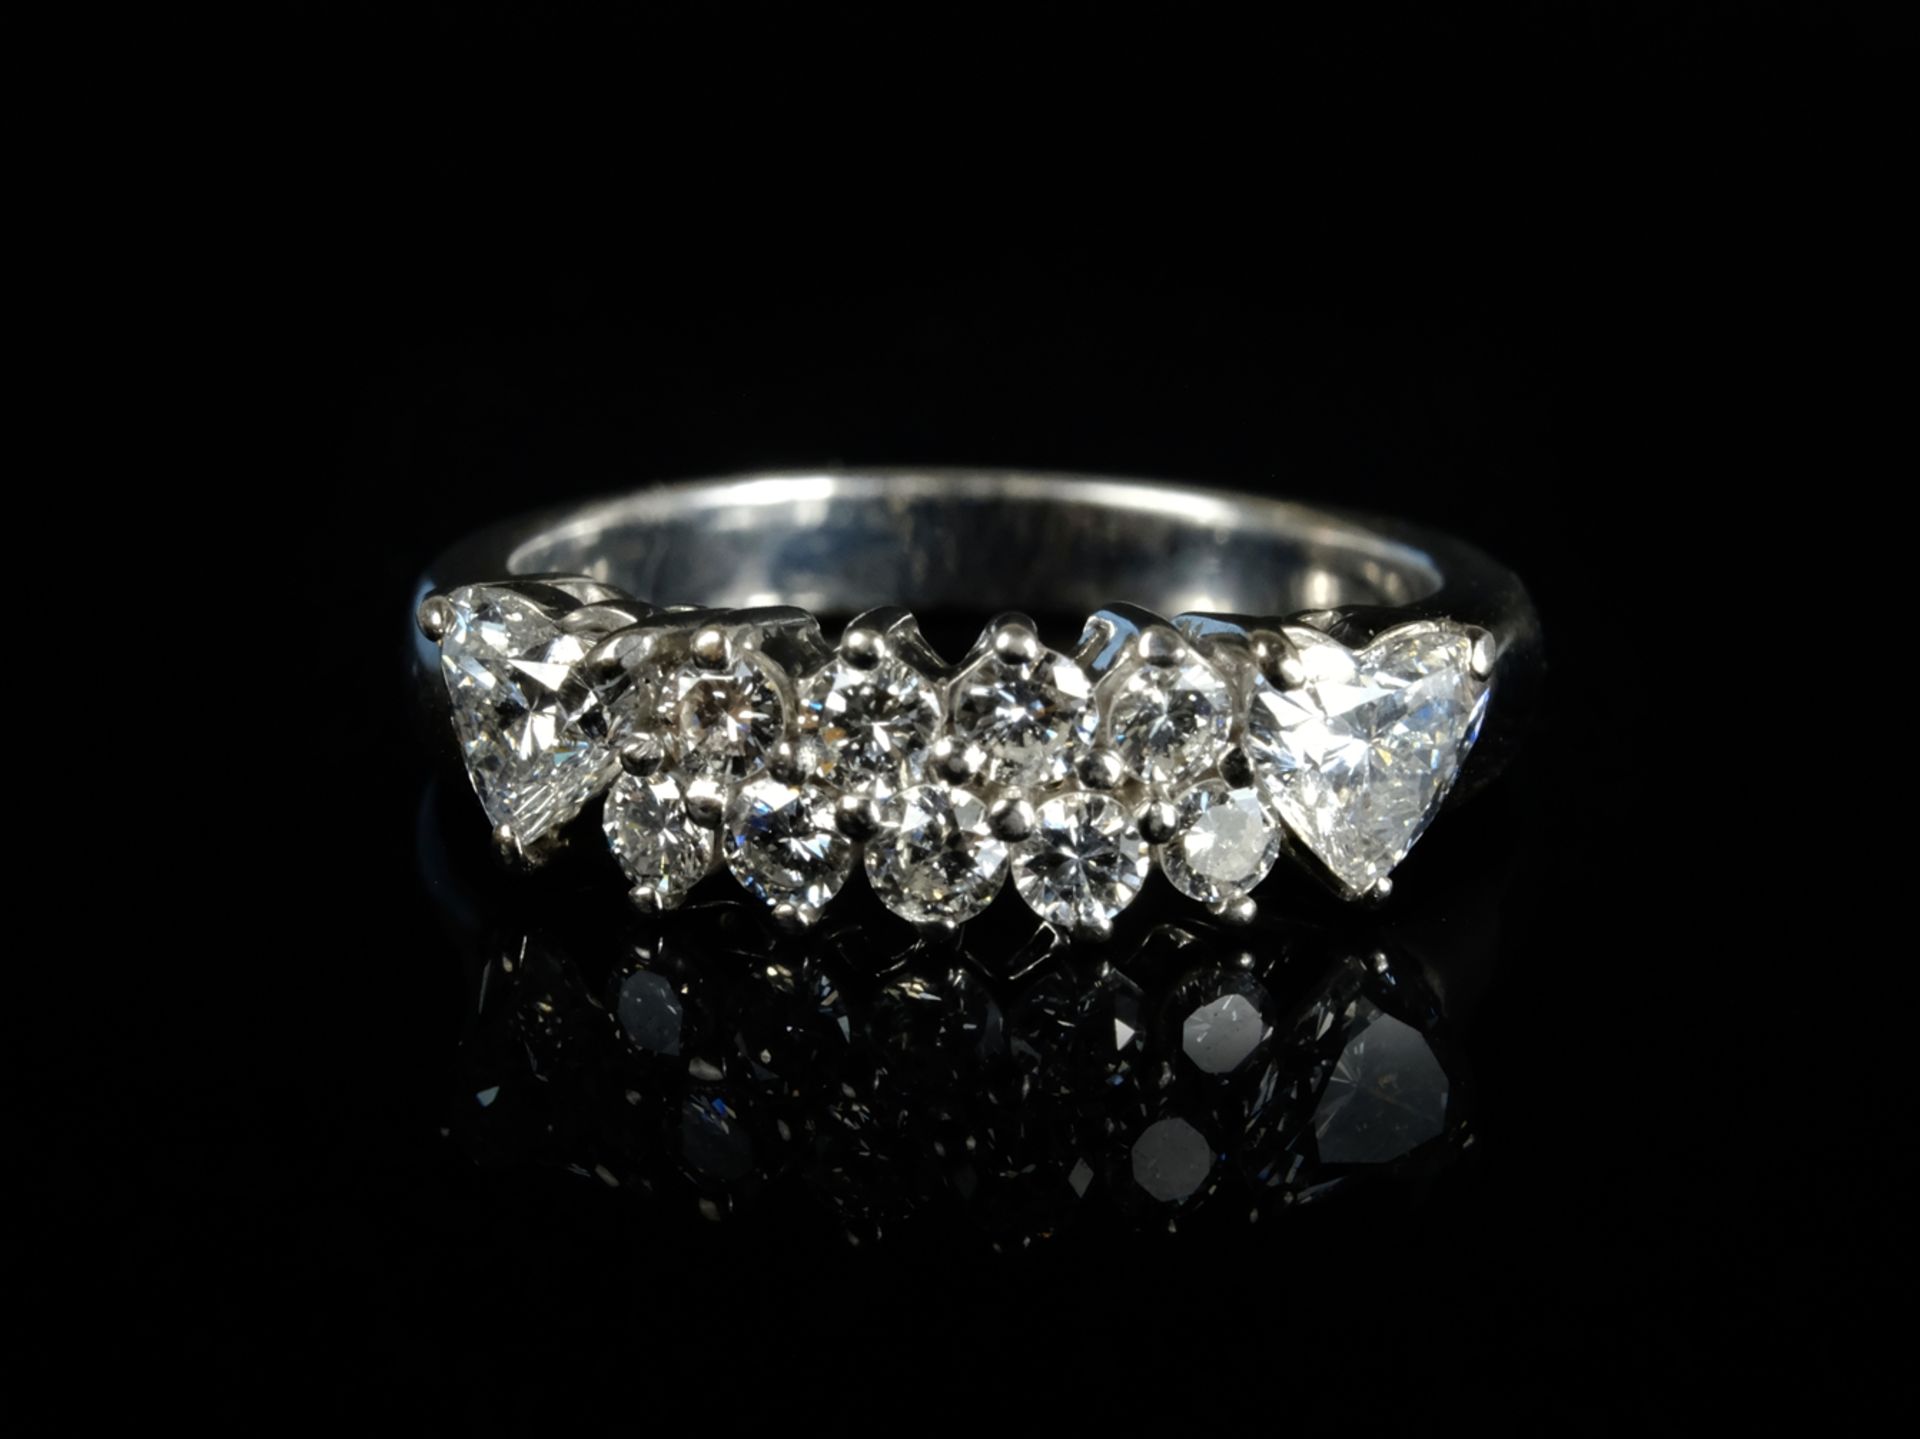 DOPPLE HEART RING set with ten brilliant-cut diamonds, flanked by two brilliant-cut diamonds in the - Image 2 of 4